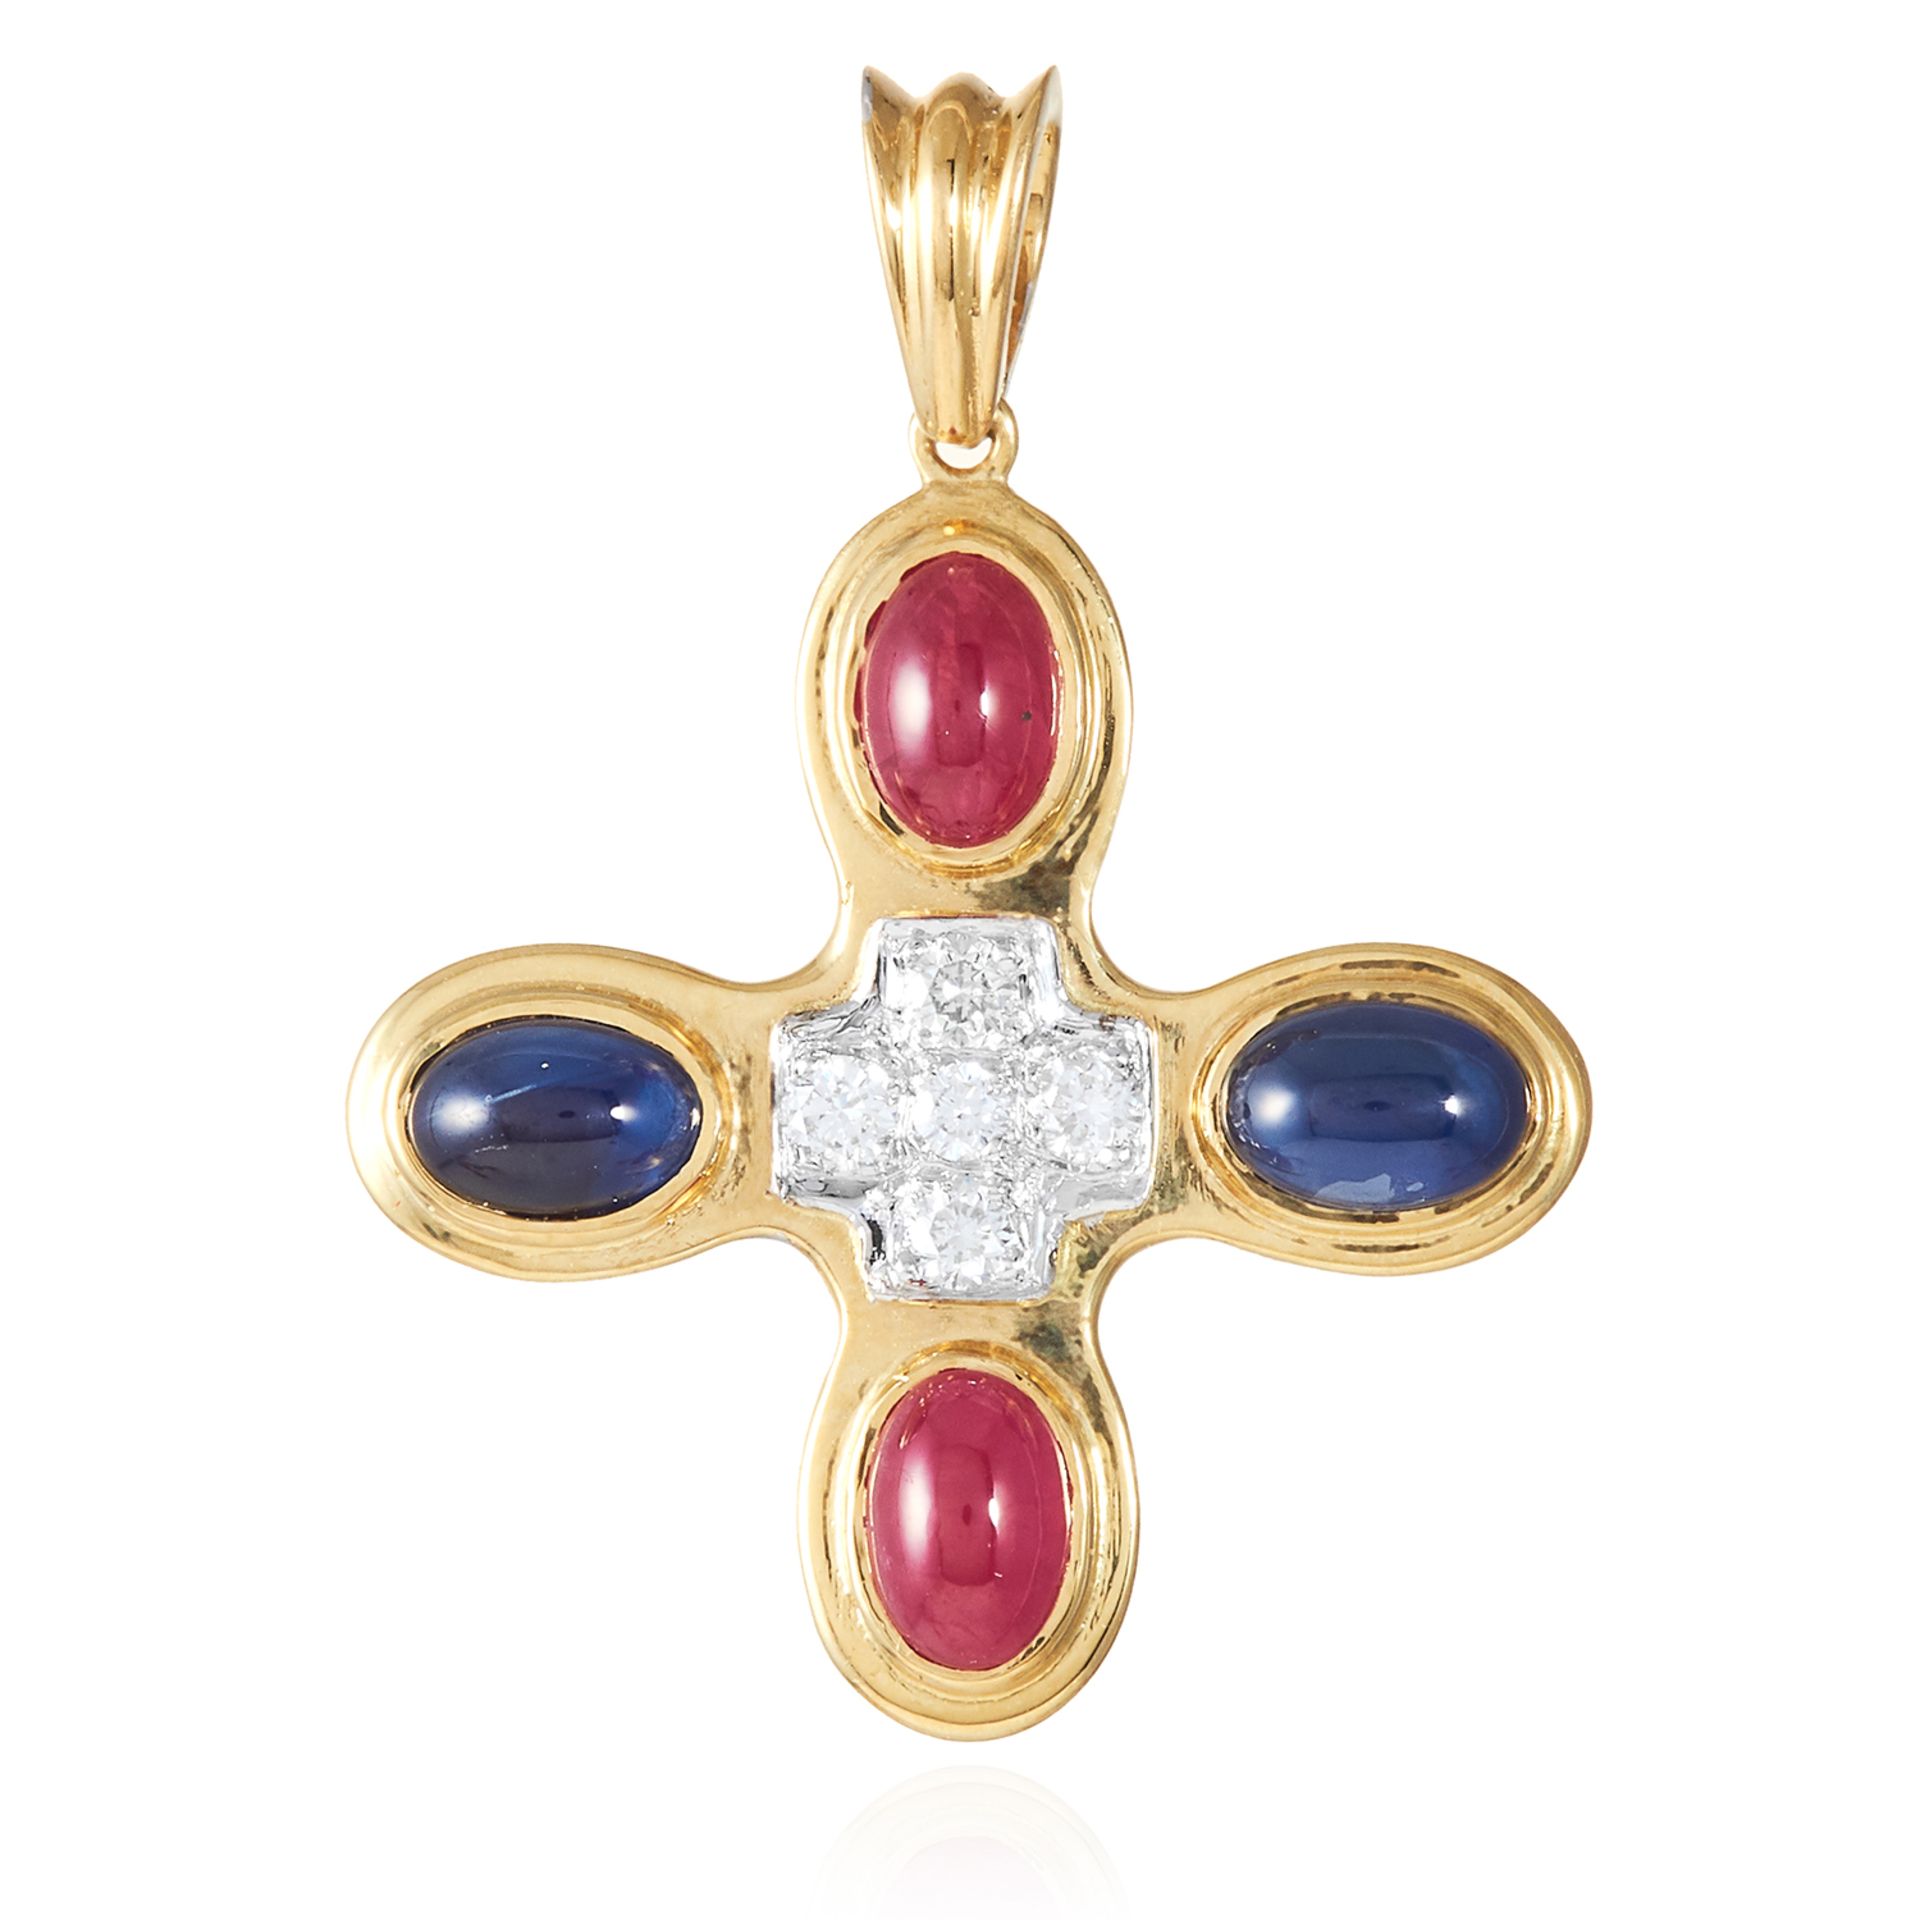 A RUBY, SAPPHIRE AND DIAMOND CROSS PENDANT in 18ct yellow gold, jewelled with two cabochon rubies,